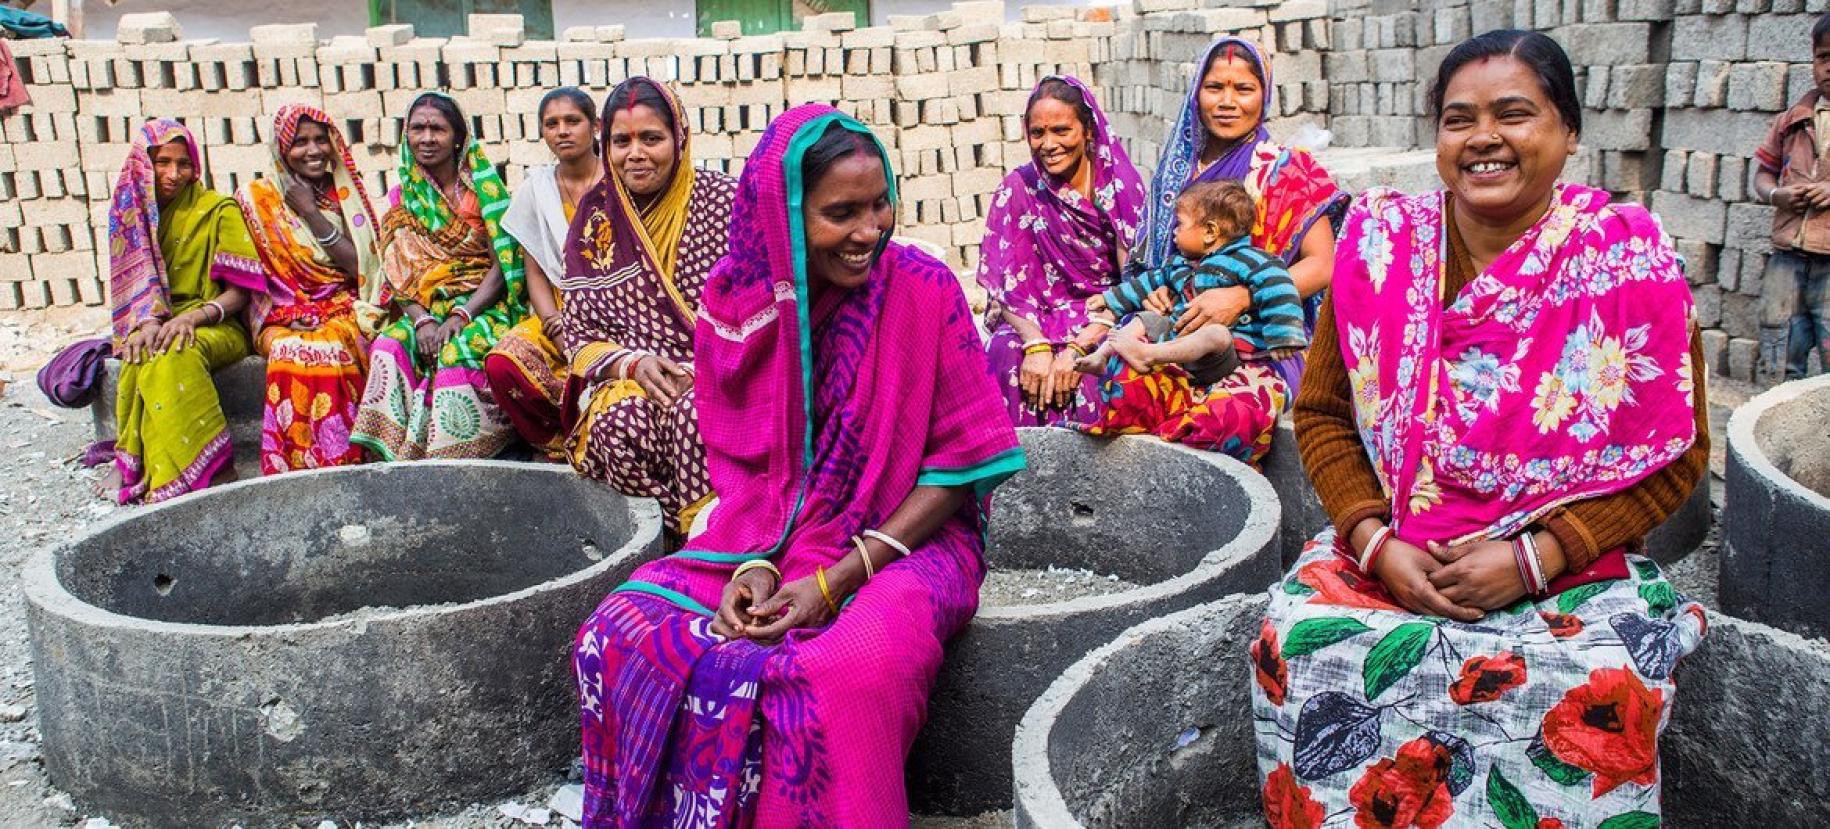 Women in colorful saris sit and talk, with a background of bricks for a soon-to-be structure behind them. 